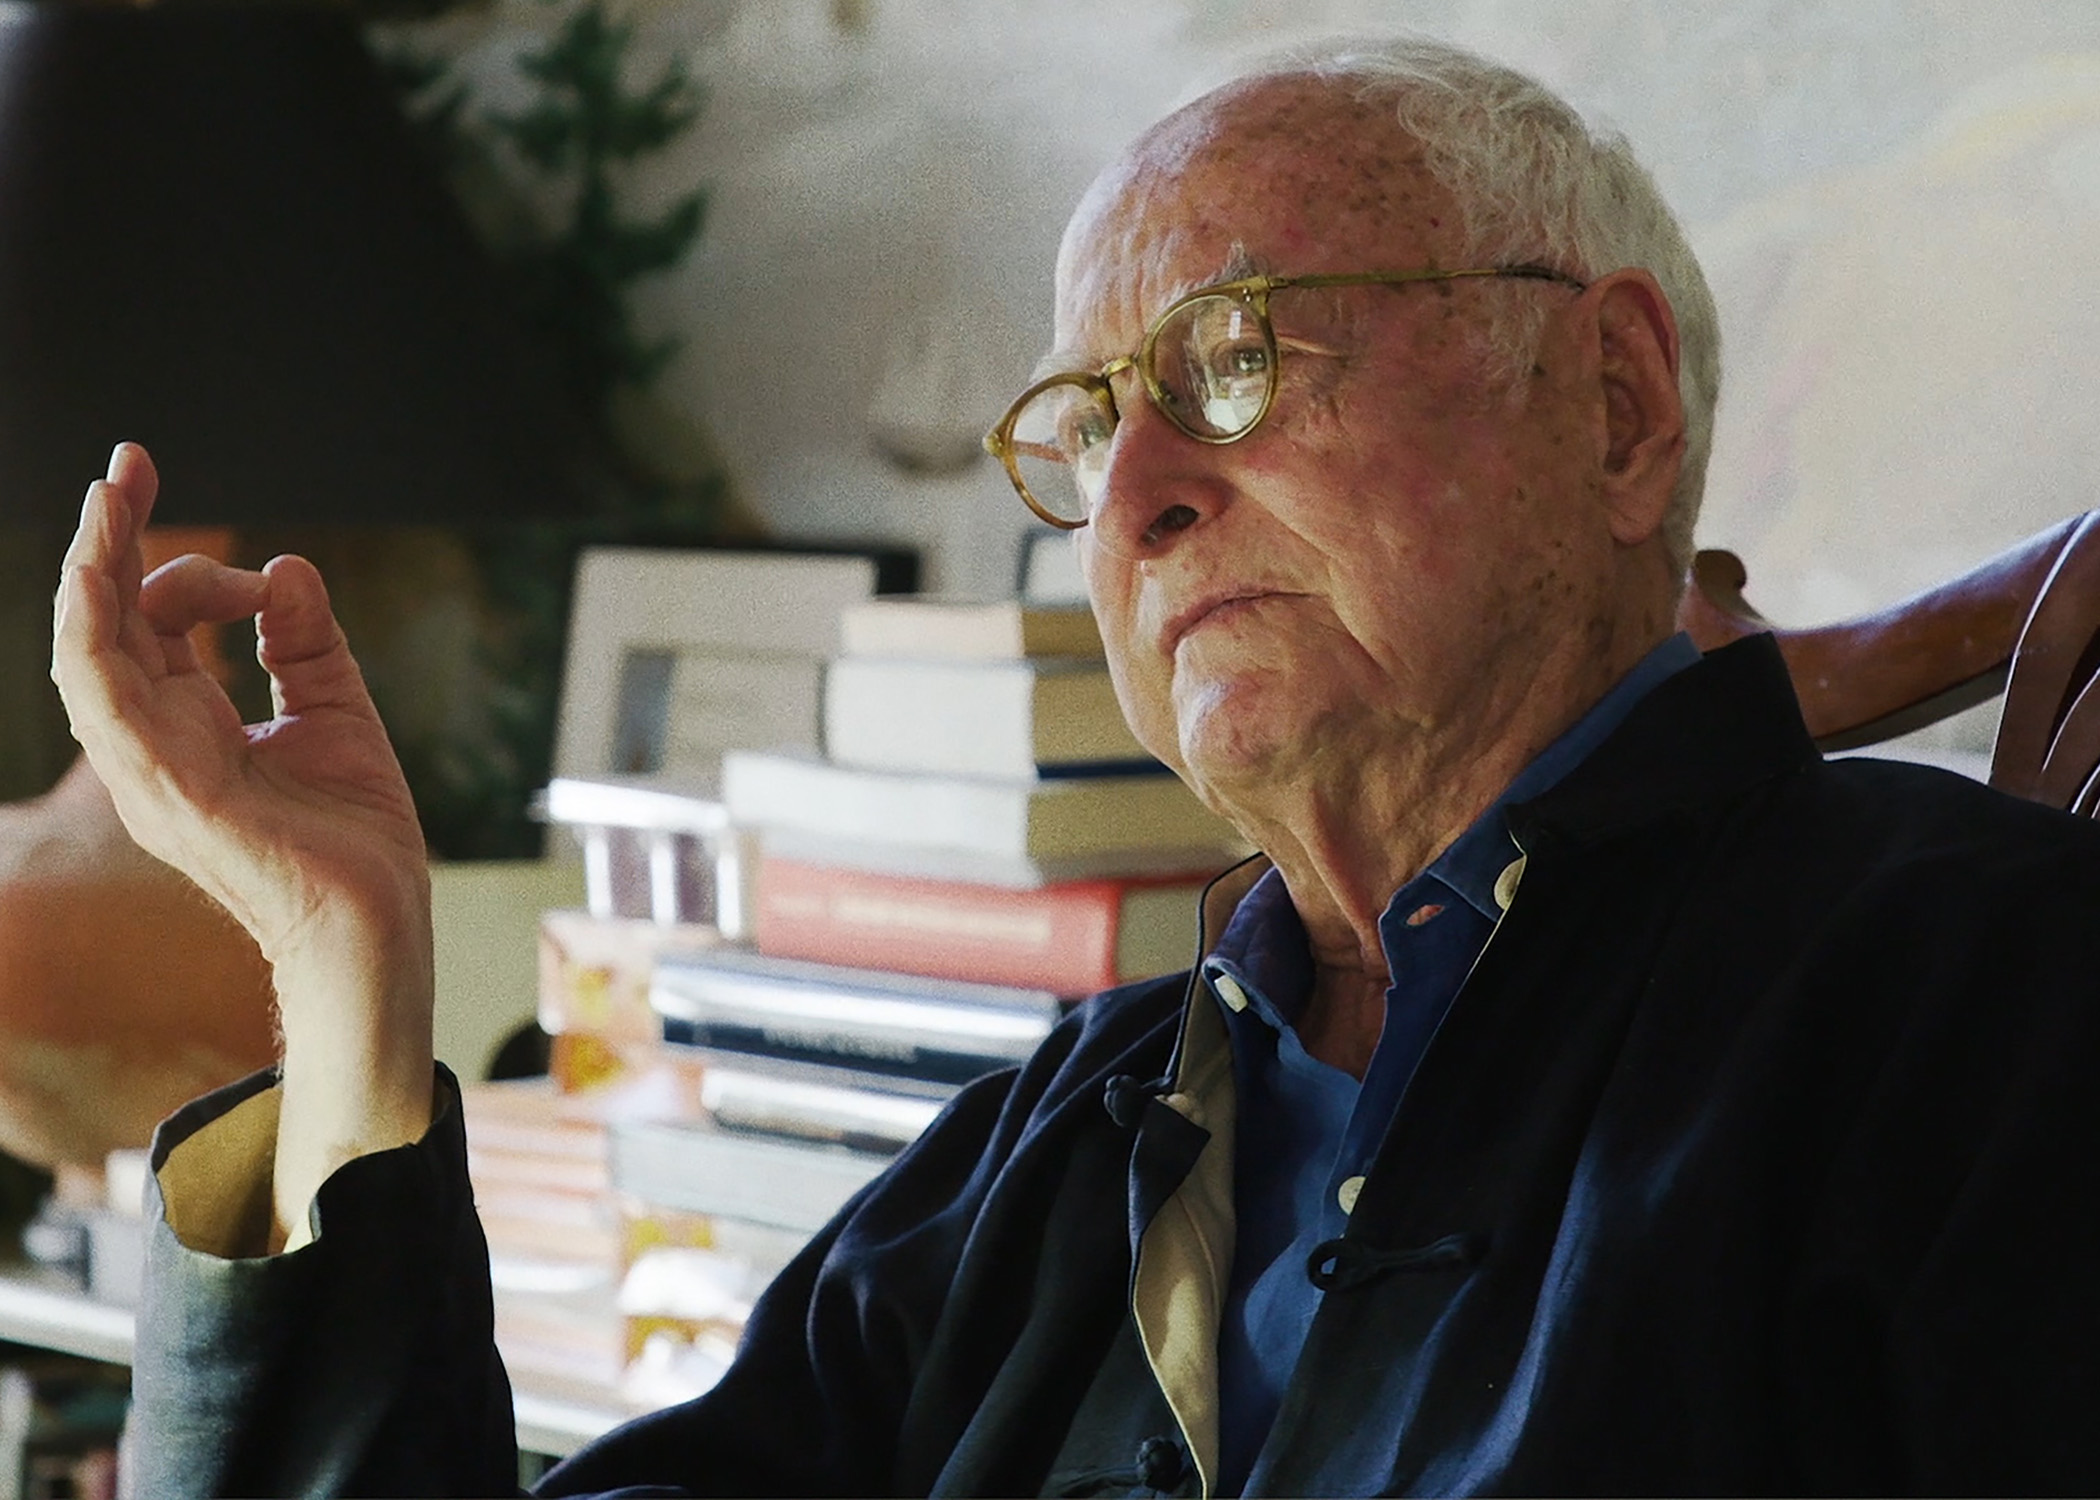 James Ivory discusses his love of architecture and the importance of place in his films.